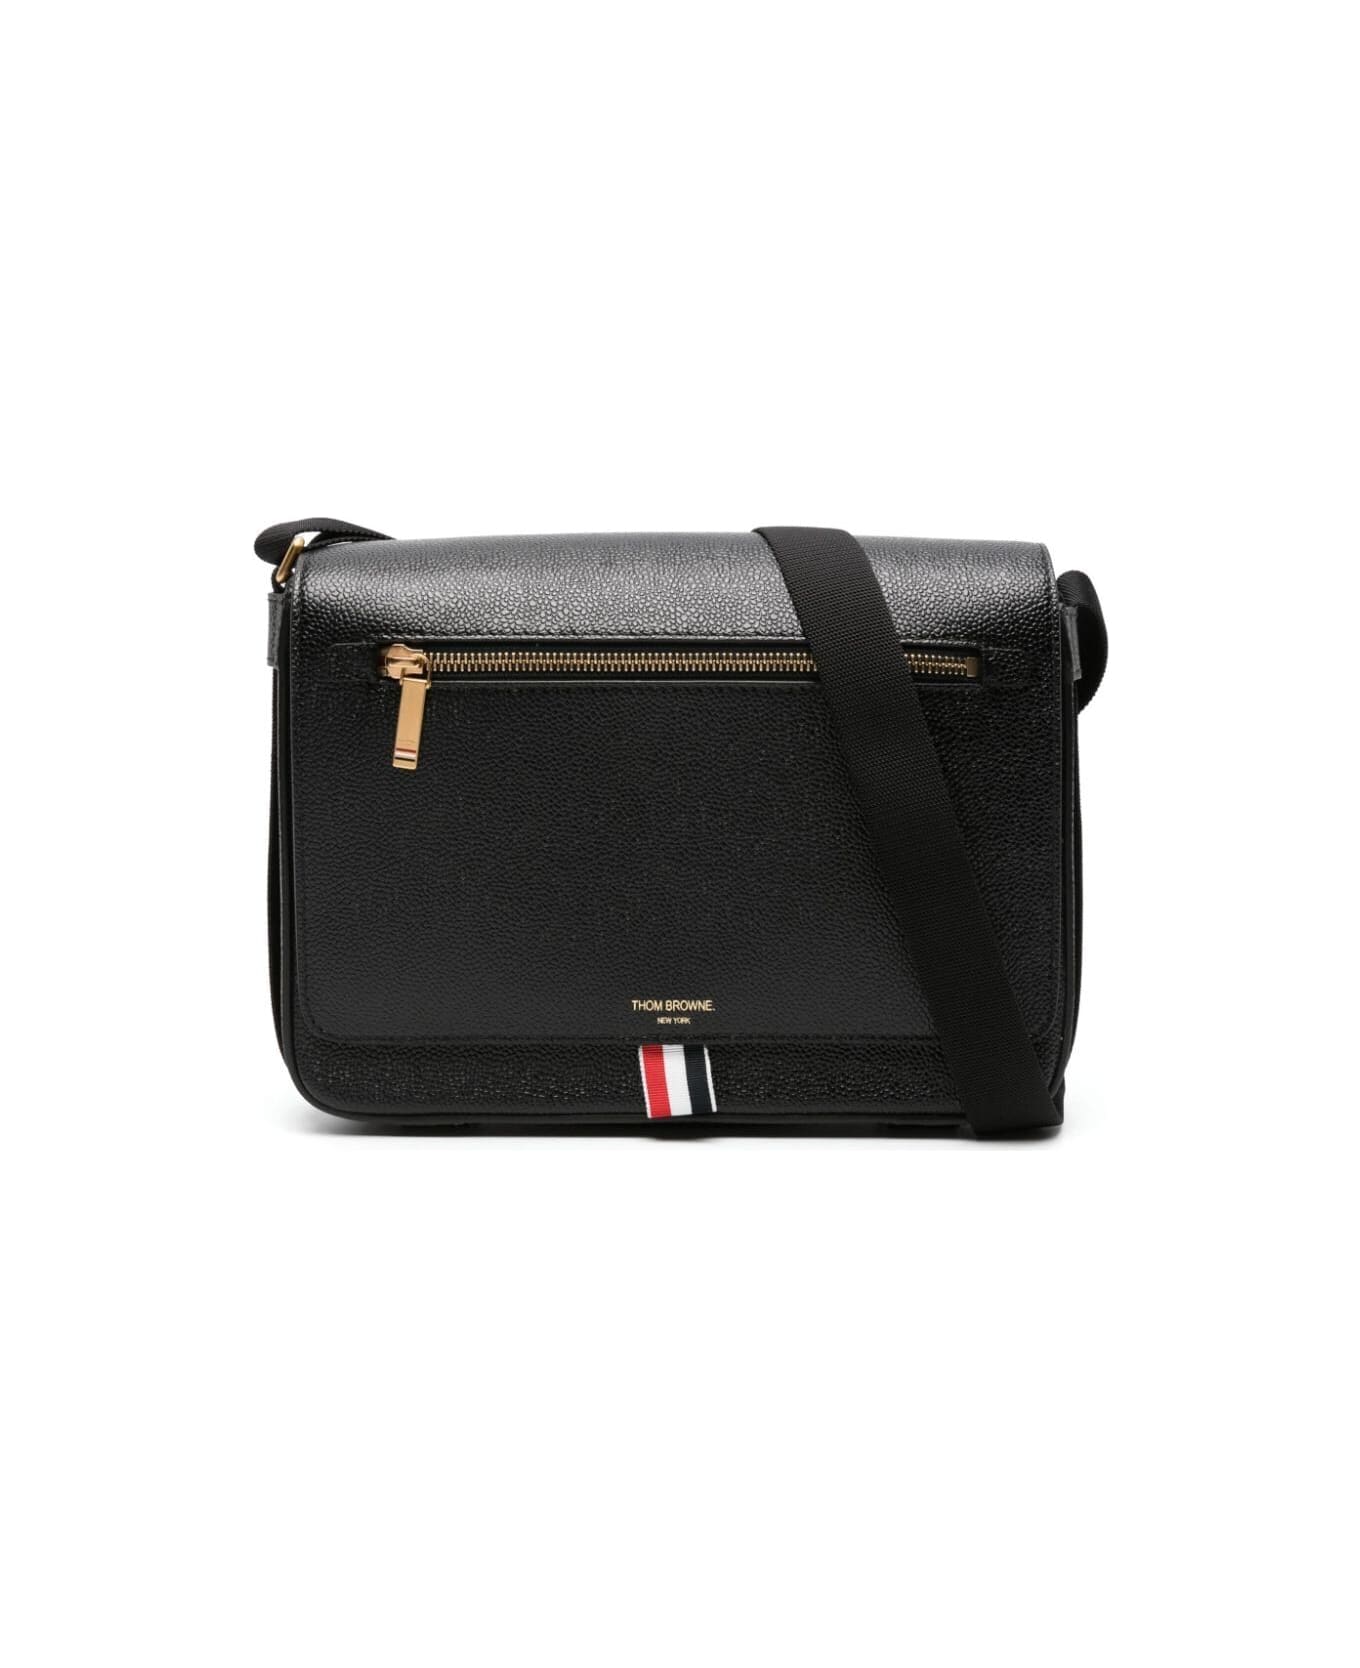 Thom Browne Reporter Bag With Webbing Strap In Pebble Grain Leather - Black ショルダーバッグ